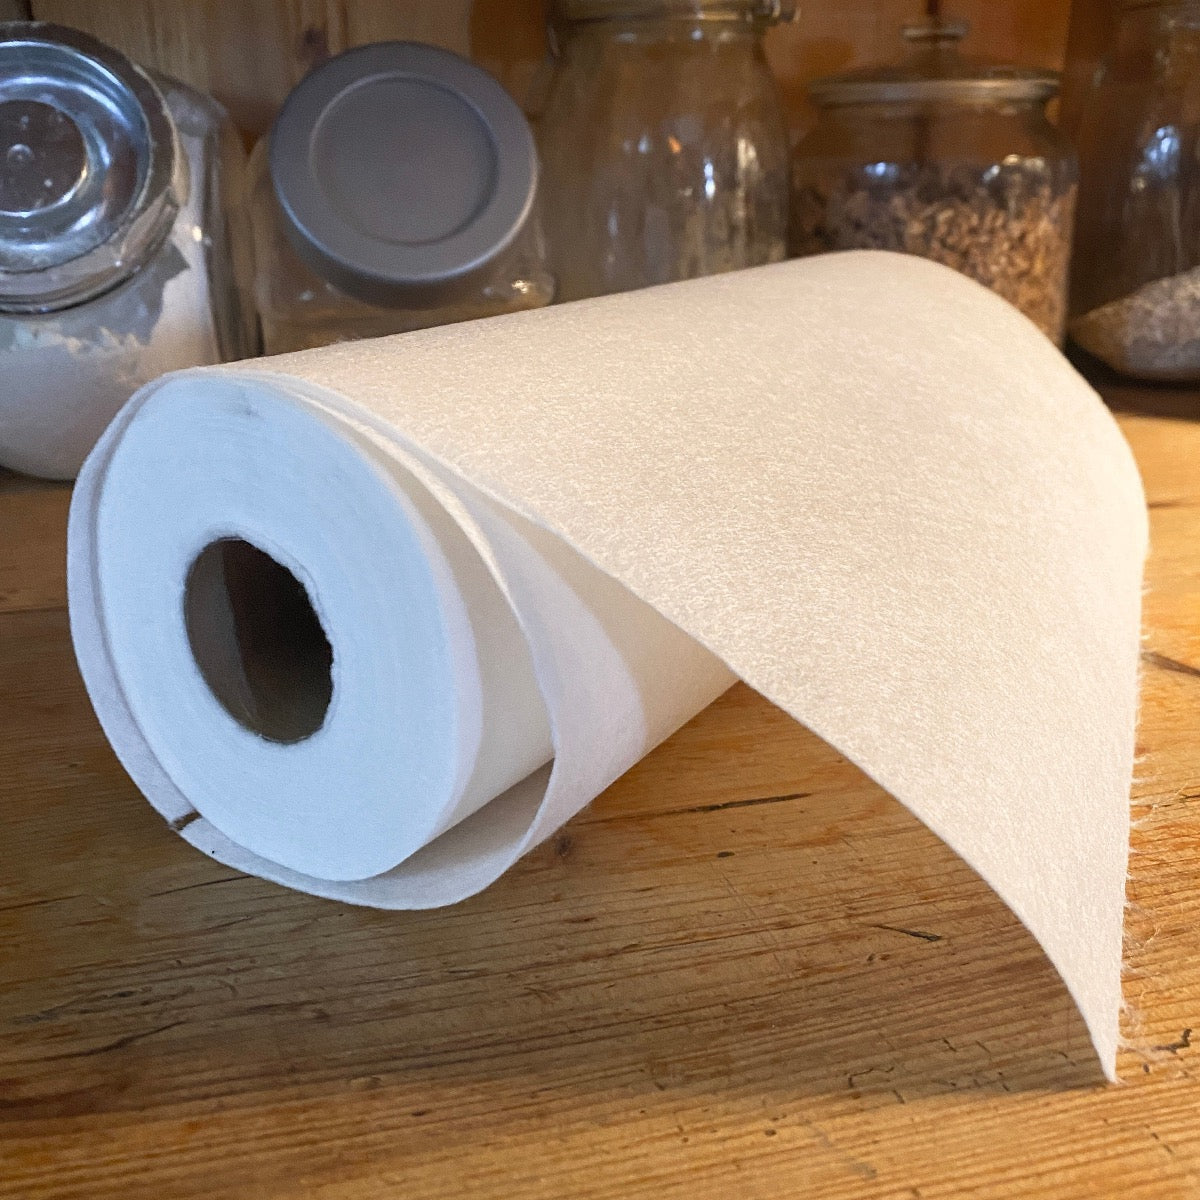 bamboo towel on roll in a kitchen